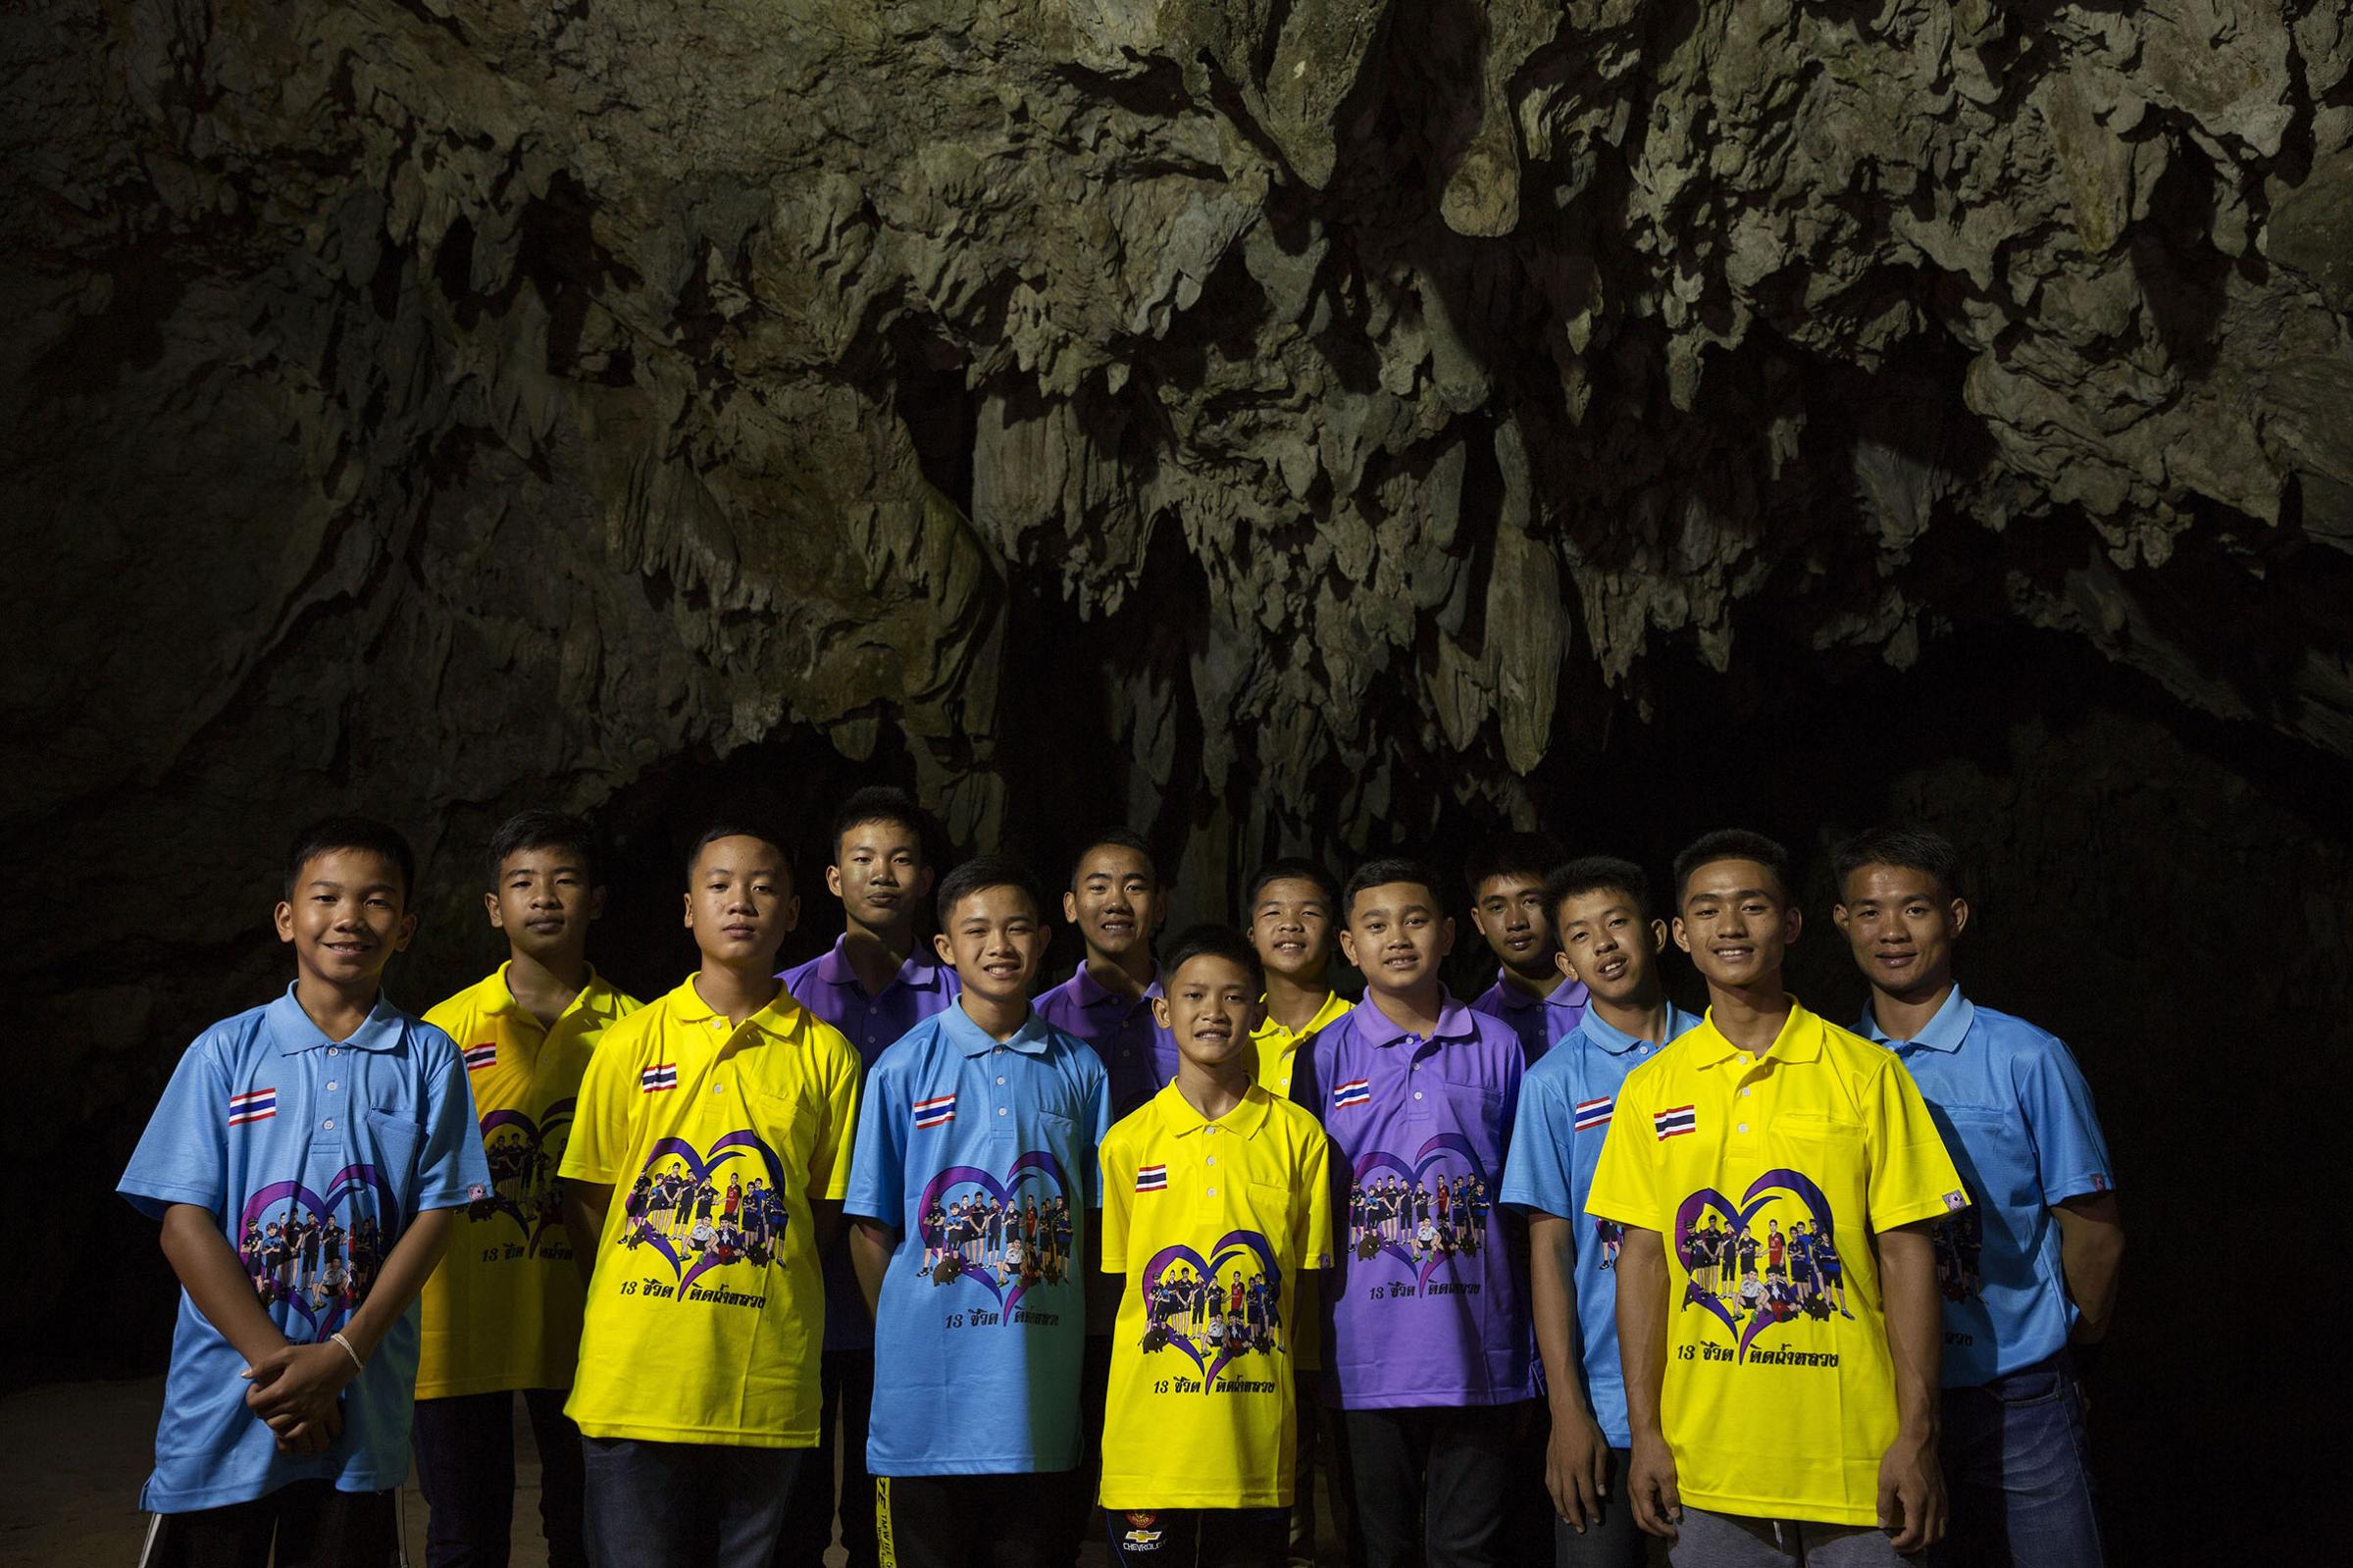 Nearly six months after the rescue, the team poses at the entrance to Tham Luang Cave